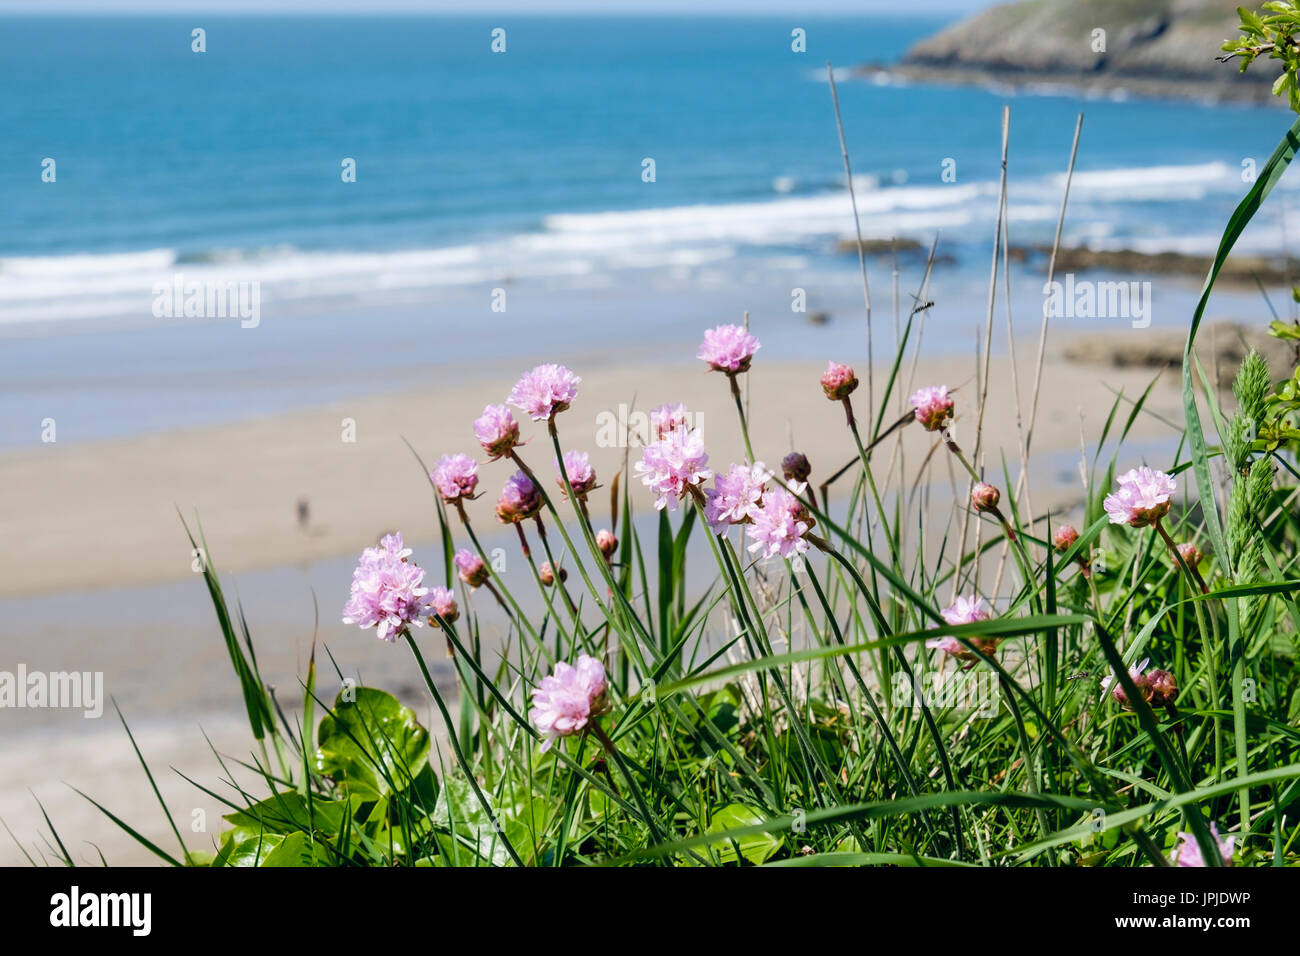 Sea Pink or Thrift (Armeria maritima) flowers growing above beach in early summer. Church Bay / Porth Swtan, Isle of Anglesey, North Wales, UK Stock Photo